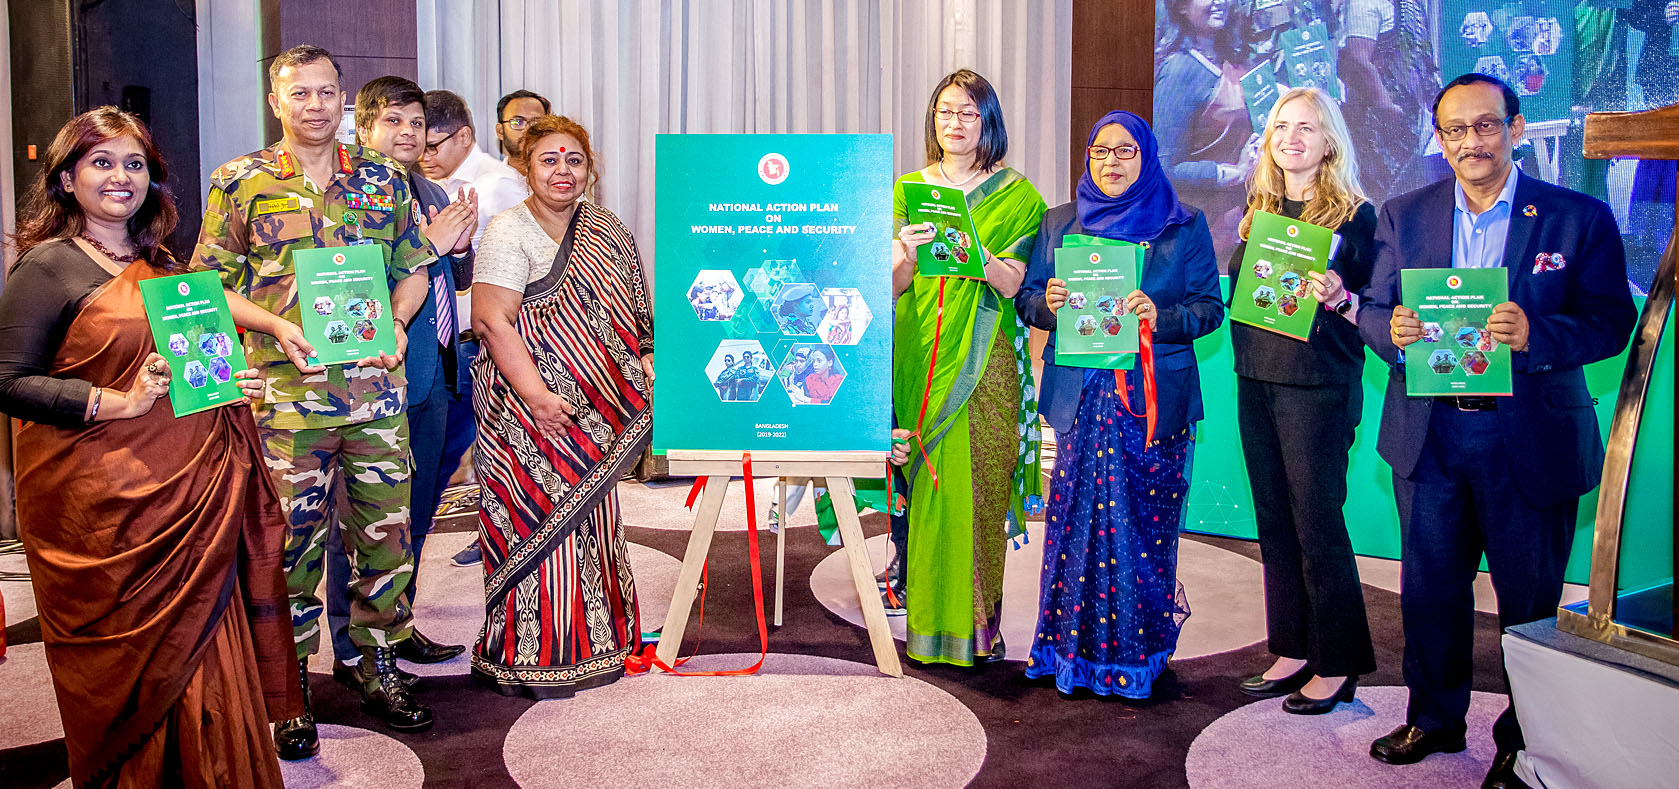 Launch of the Bangladesh National Action Plan on Women, Peace and Security, 2019 Photo: UN Women/Activation Ltd